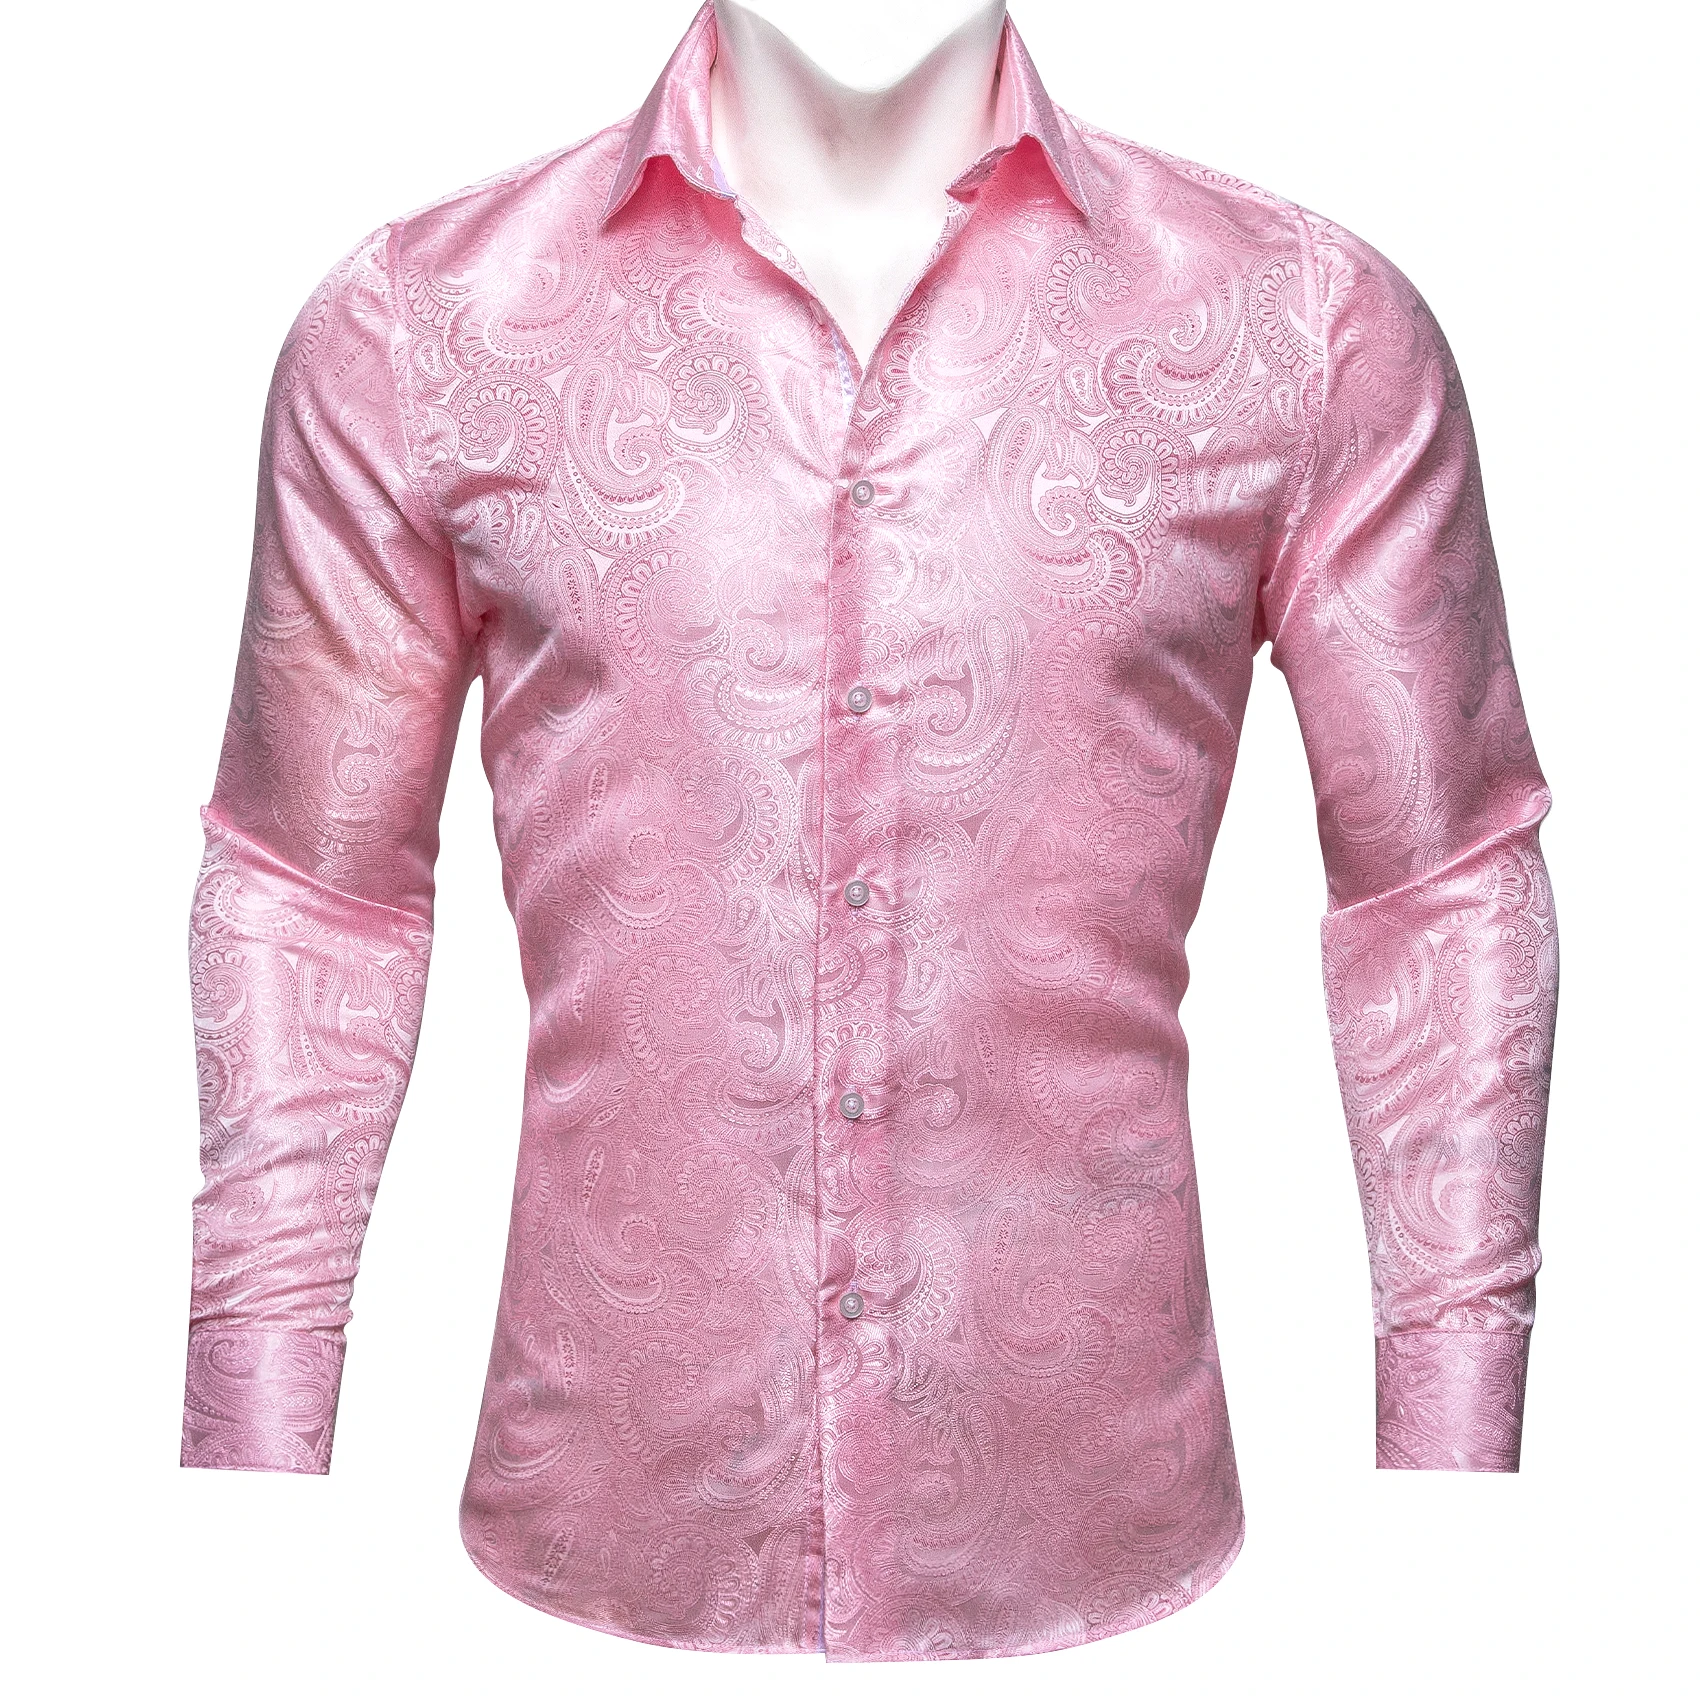 

Exquisite Silk Shirts for Men Hot Pink Spring Autumn Paisley Embroidered Long Sleeve Blouse Exquisite Casual Barry. Wang CY-0611